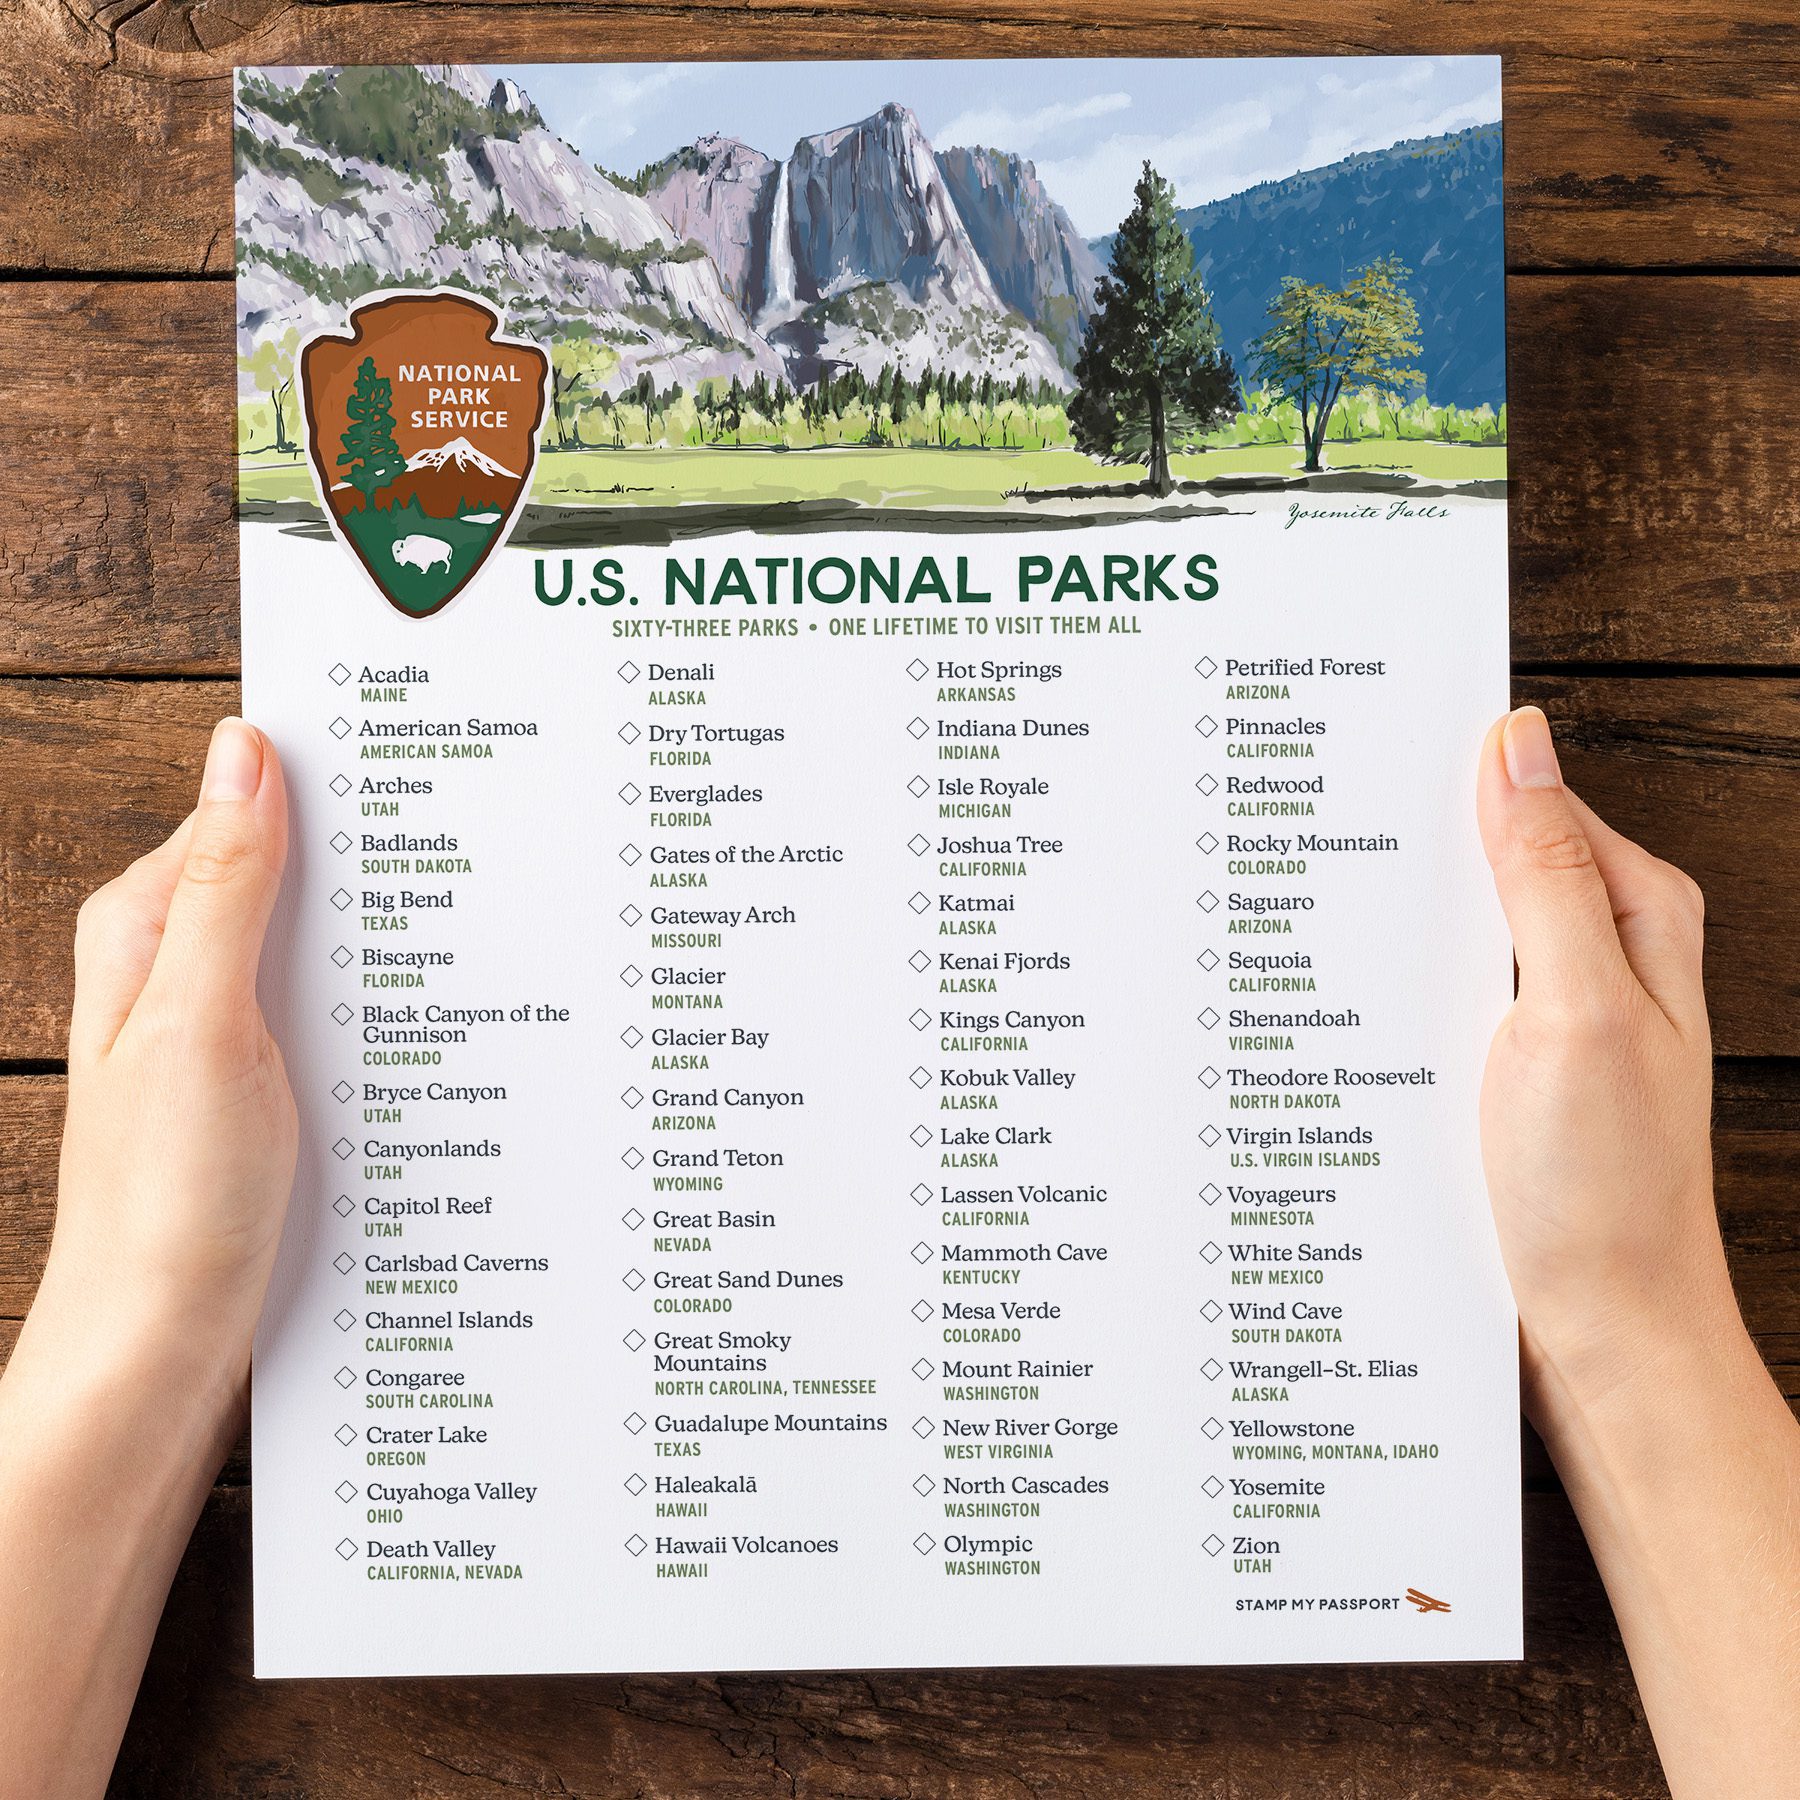 National Park Checklist held by woman